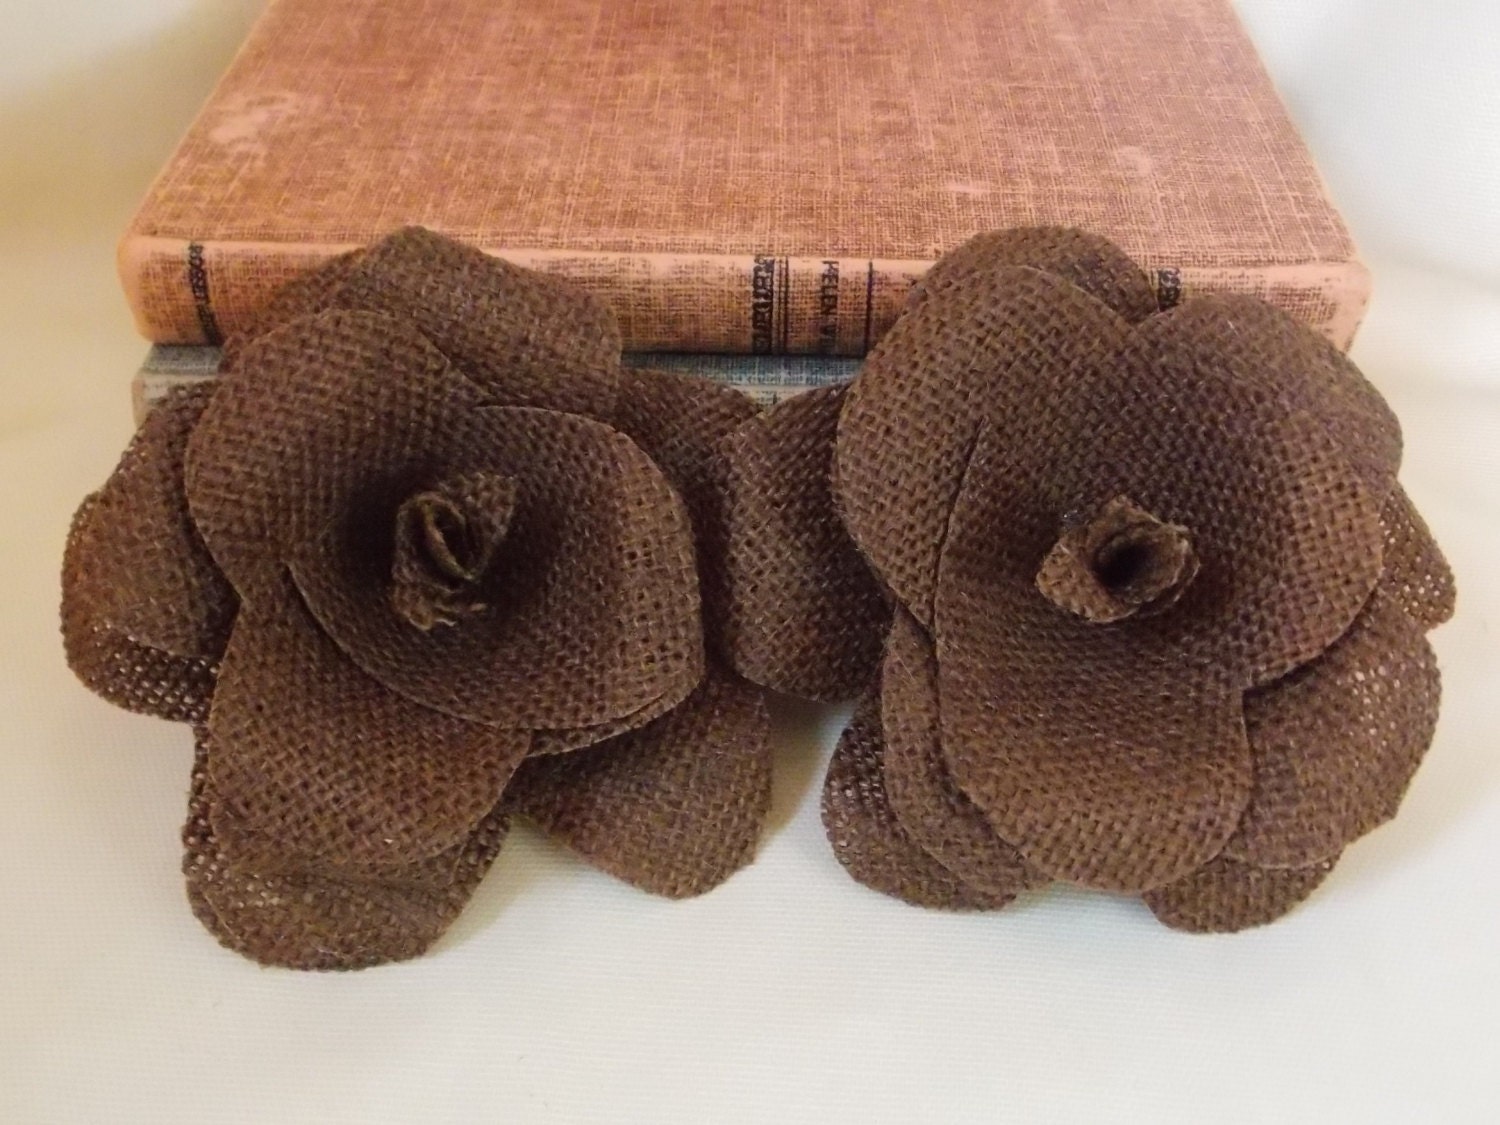 Burlap Wholesale Flowers Table Decoration Decor Country Shabby Chic Rustic Decor Home Decoration Brown Flowers Autumn Fall Decoration